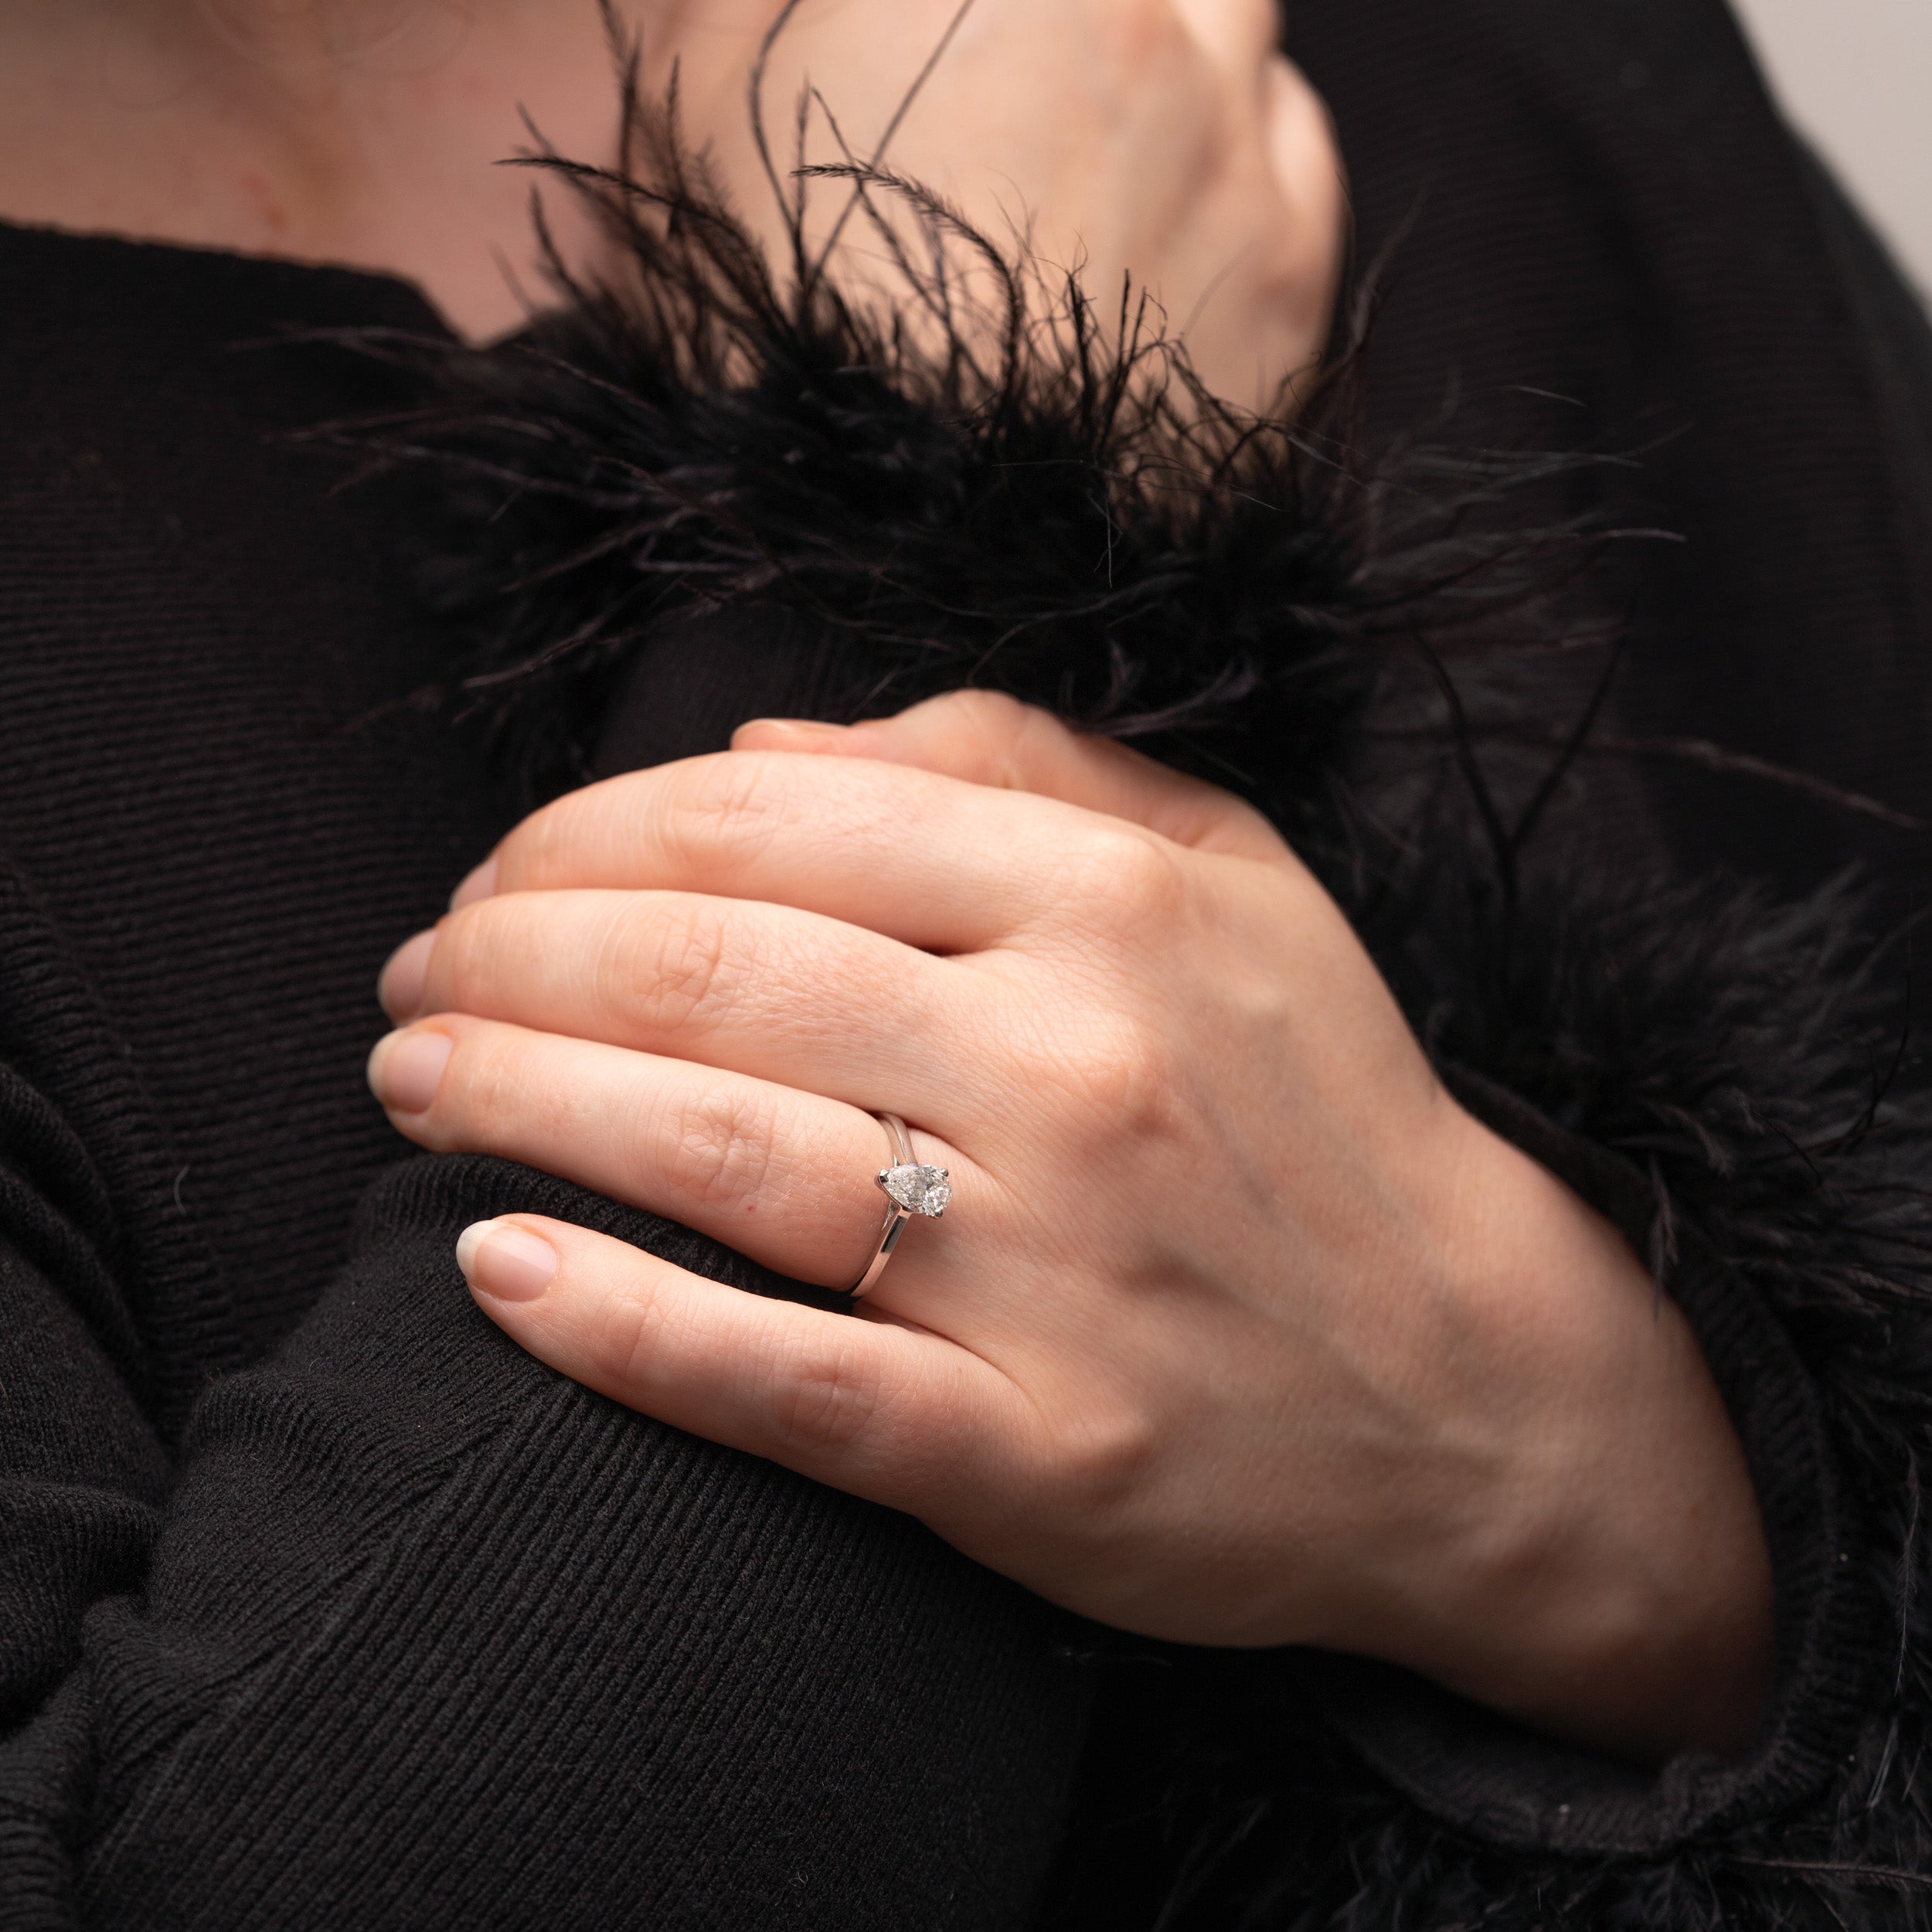 Slim band solitaire pear cut ring is worn on models hand, model is wearing black jumper with black feather sleeves.